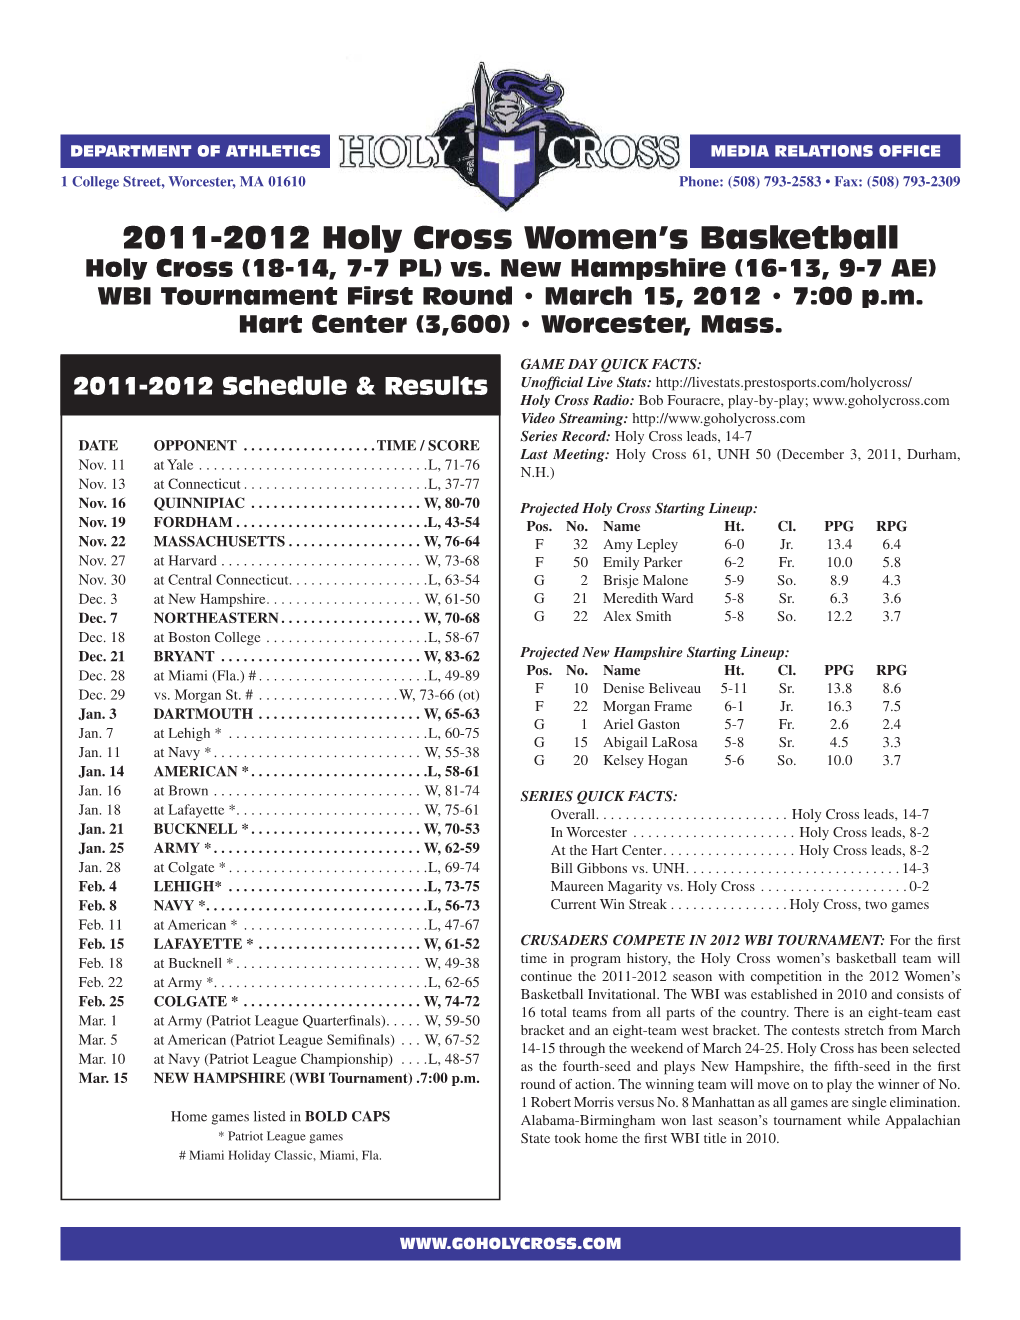 2011-2012 Holy Cross Women's Basketball Holy Cross Combined Team Statistics (As of Mar 13, 2012) All Games